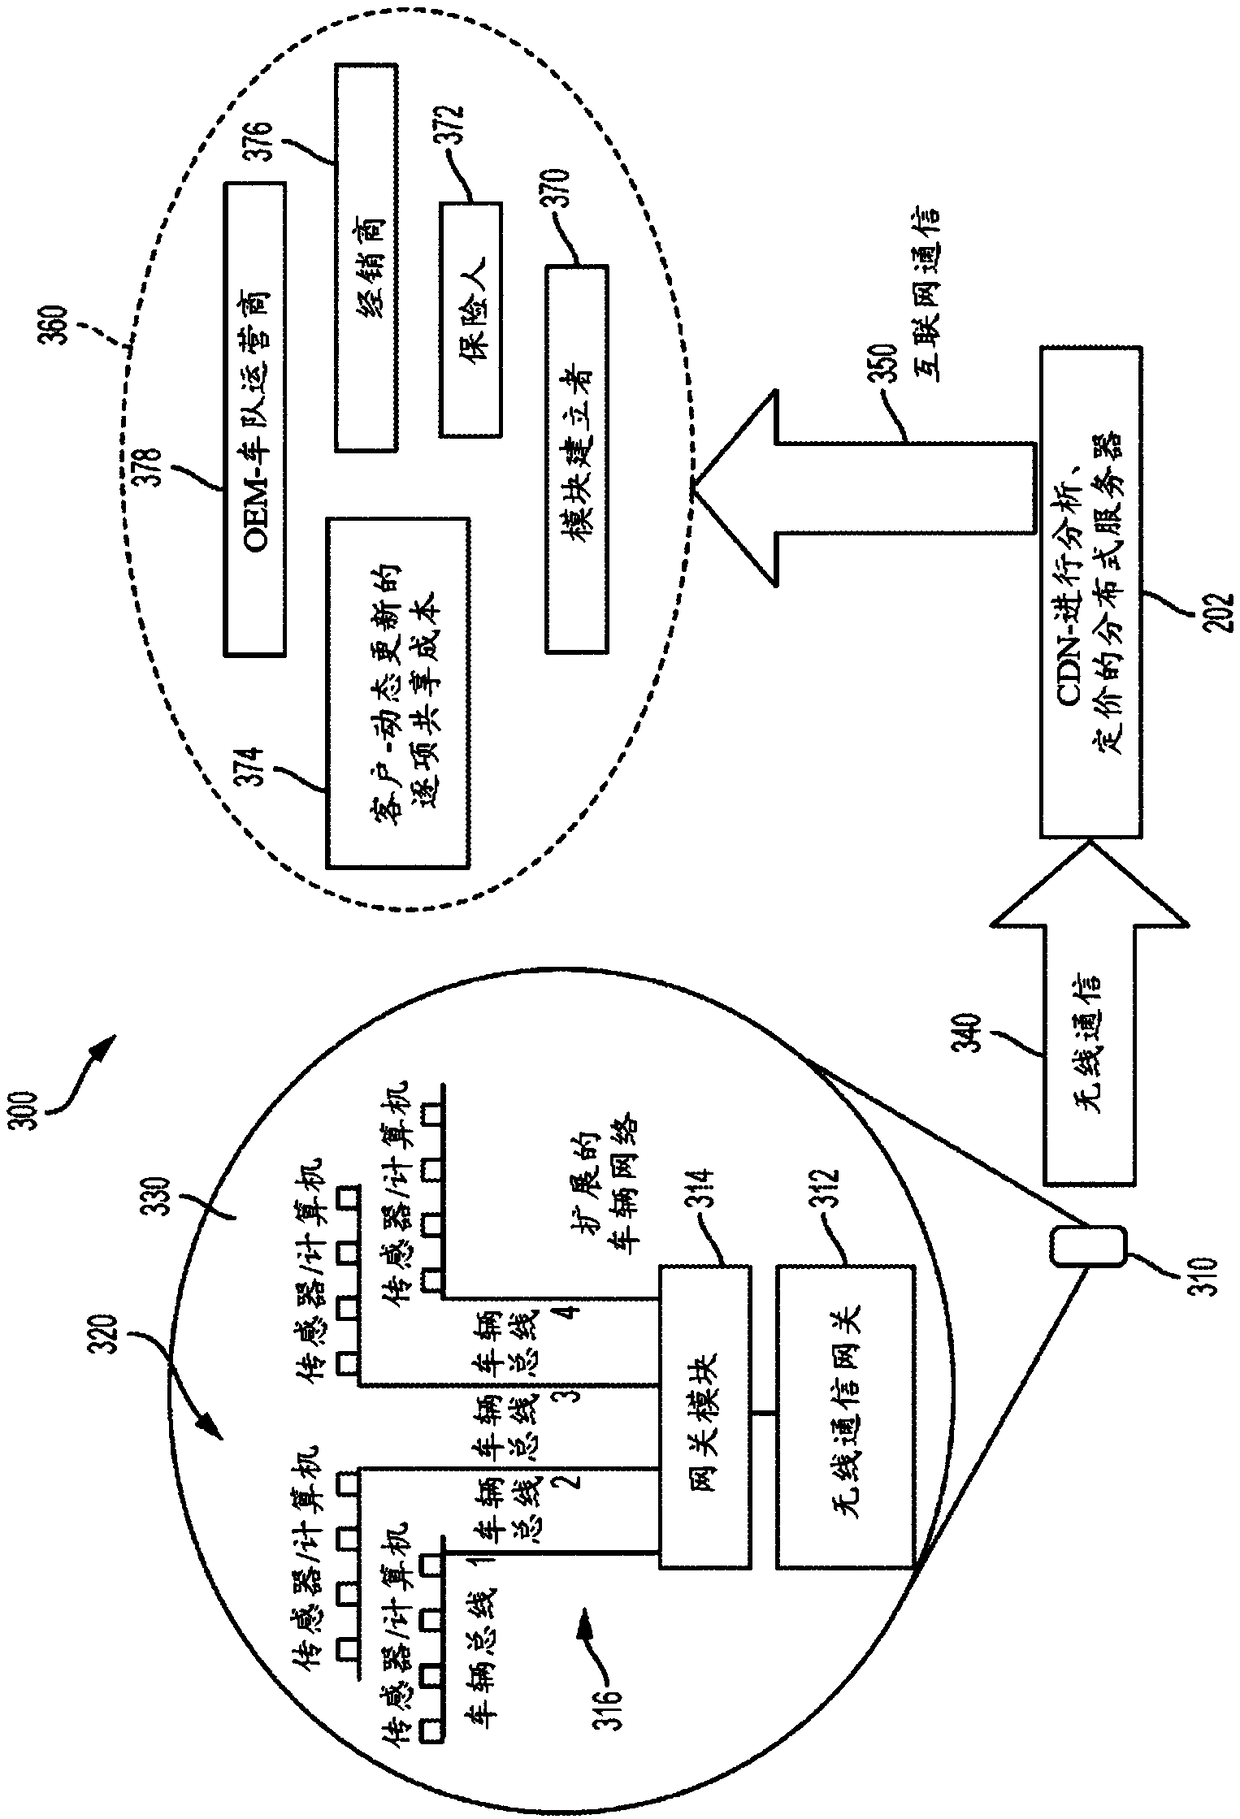 Cloud-based dynamic vehicle sharing system and method